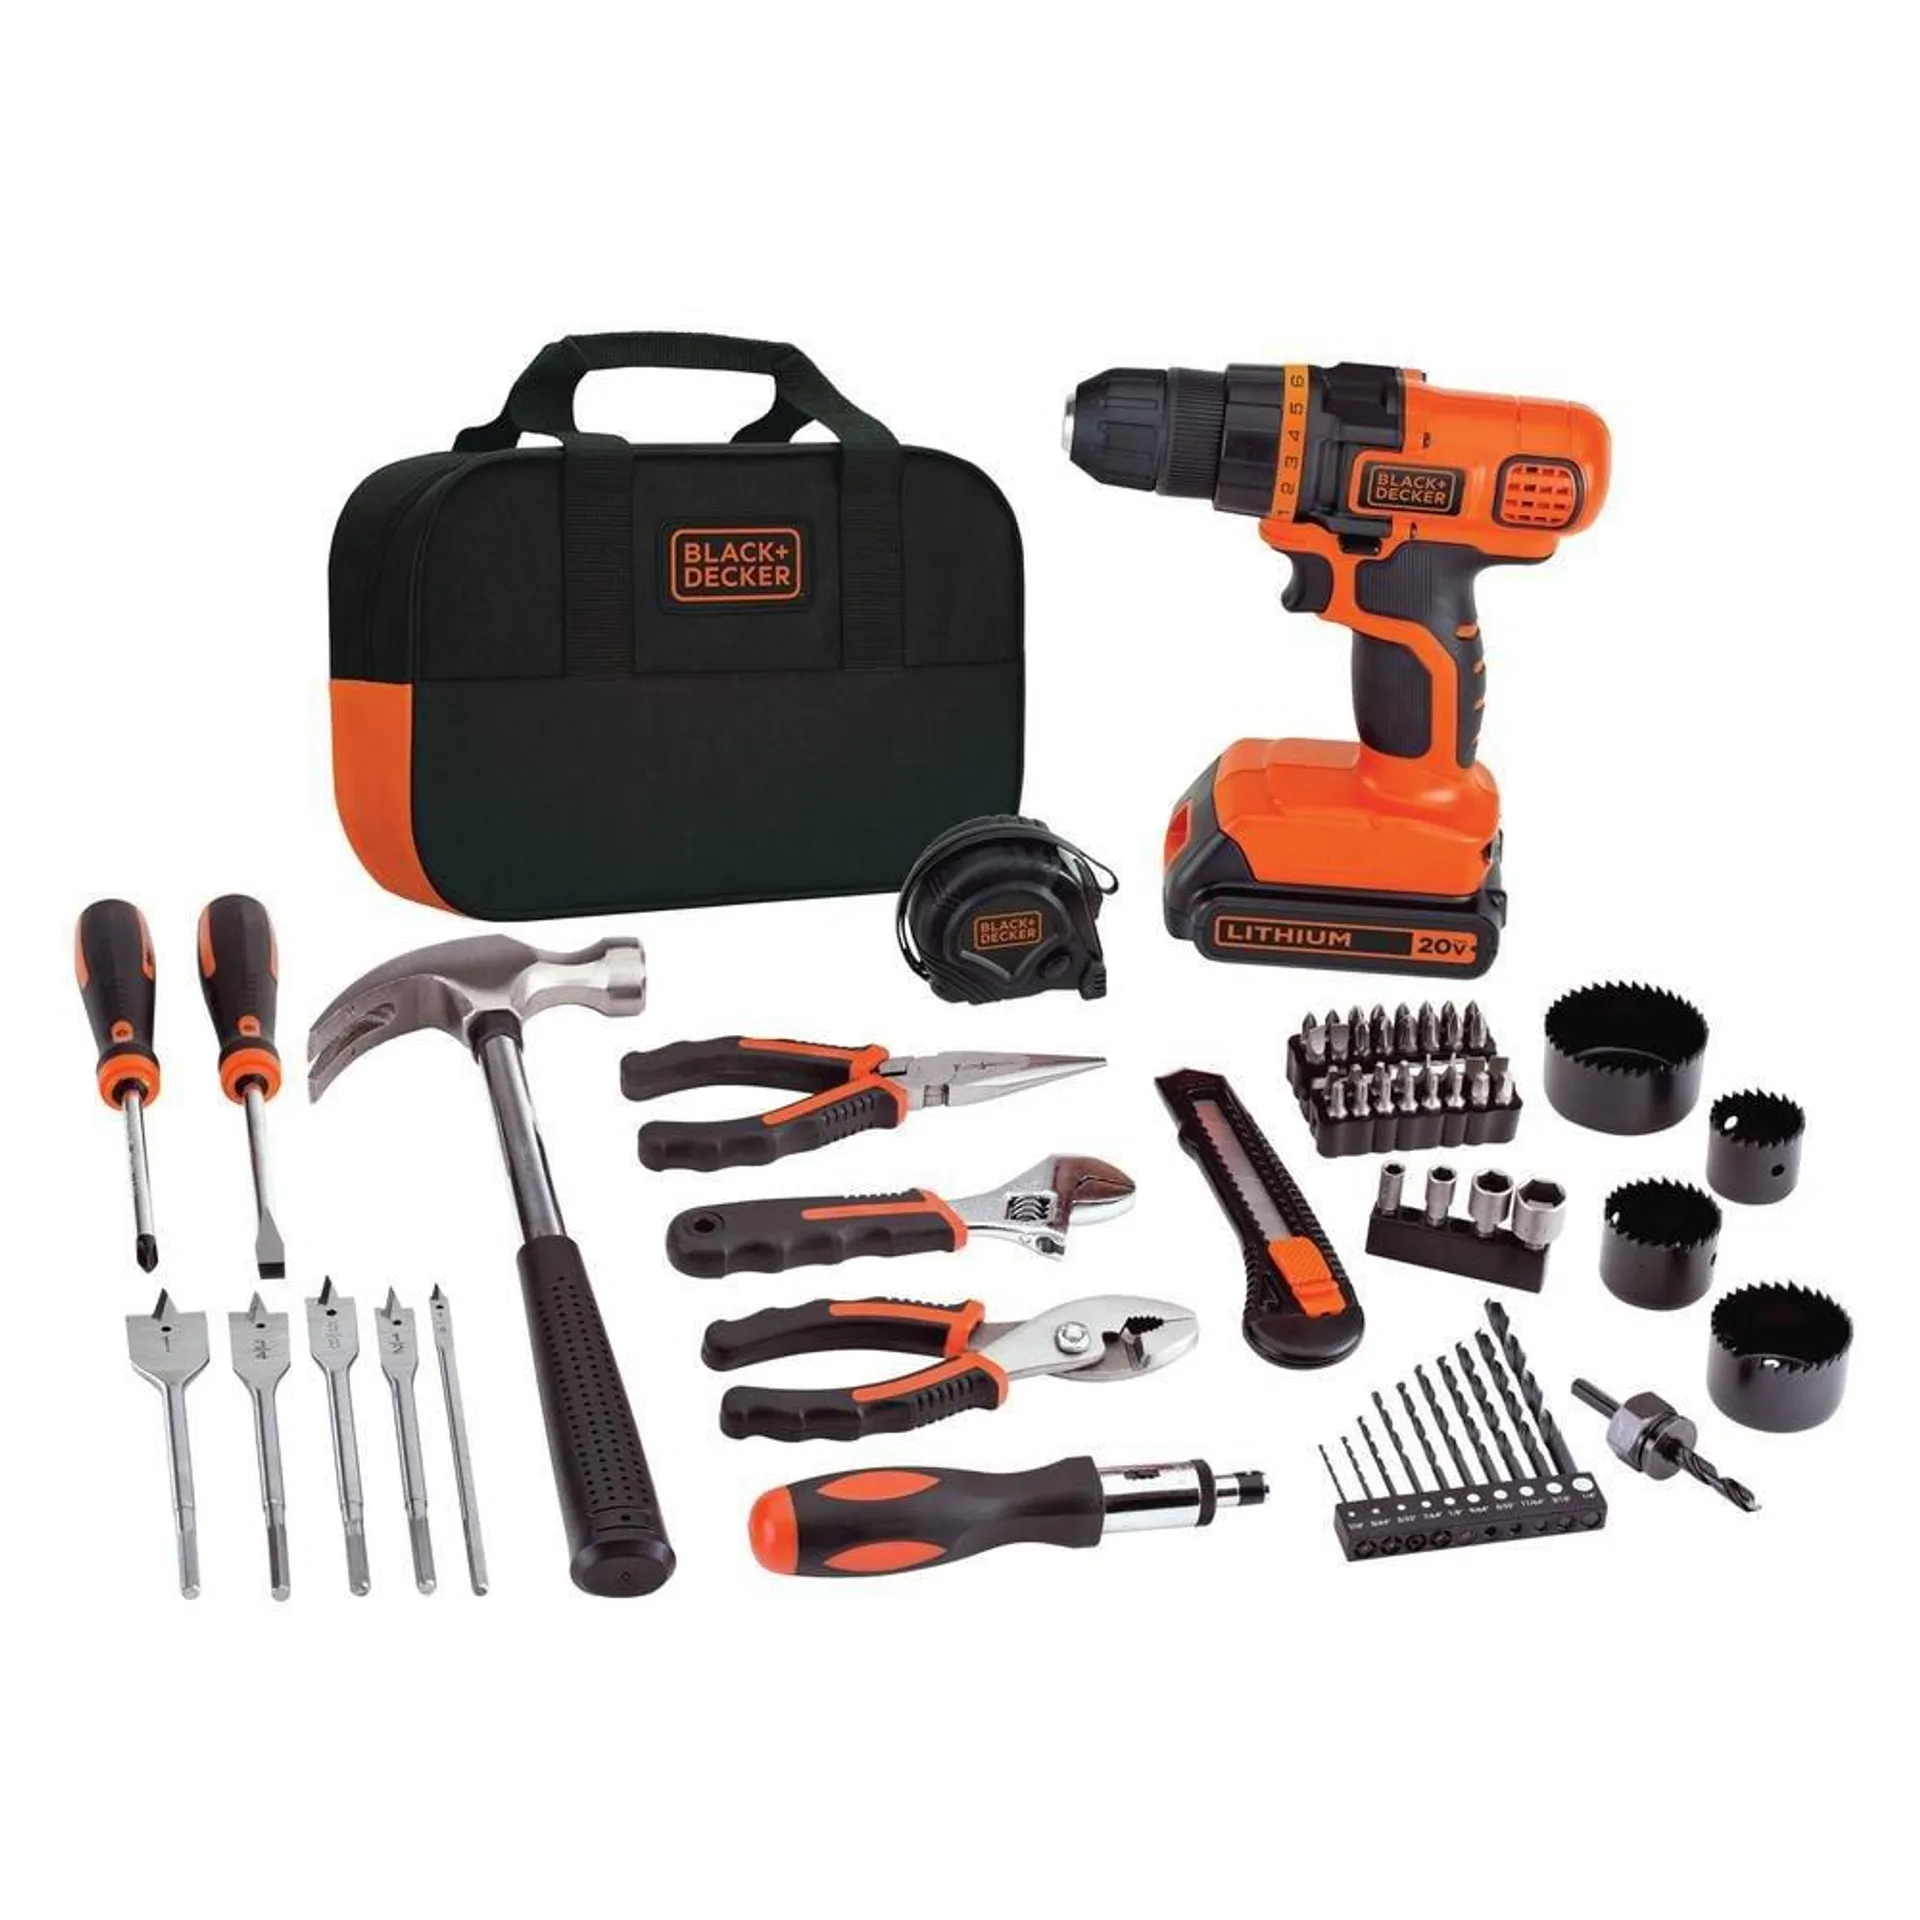 20V MAX Lithium-Ion Cordless Drill and Project Kit with 1.5Ah Battery, Charger and Bag